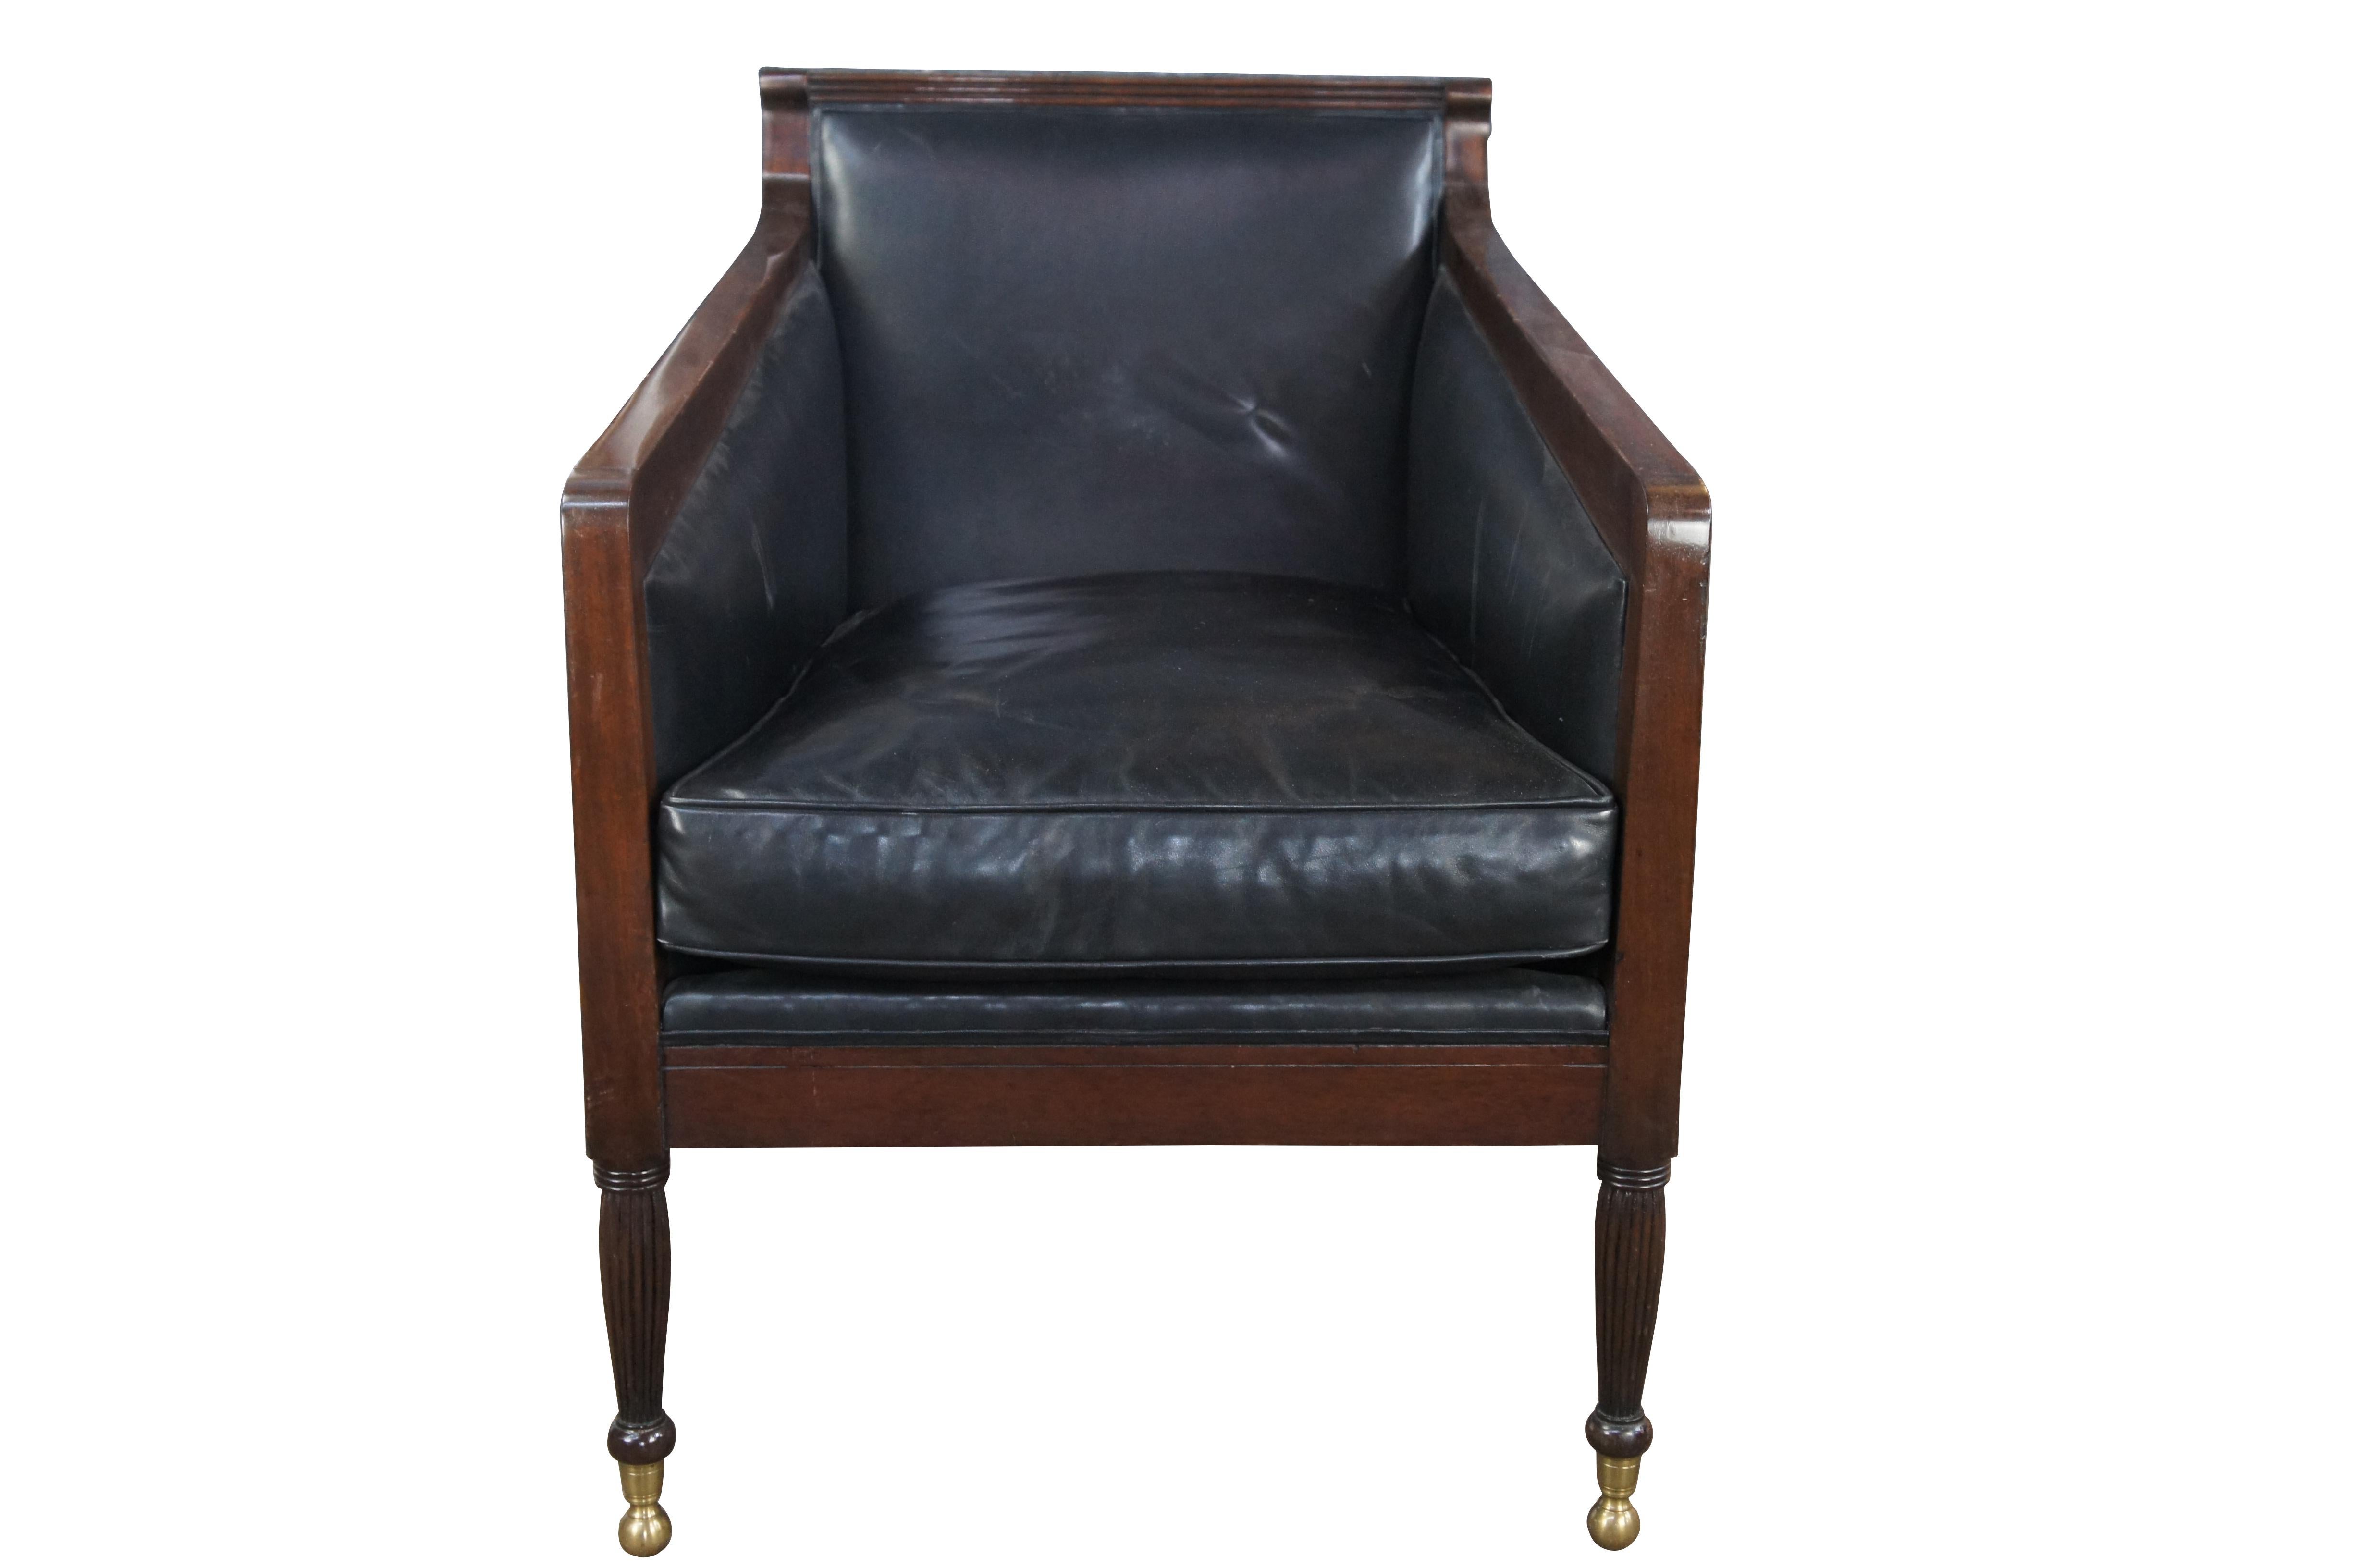 Dessin Fournir Nelson Arm Chair, Circa 2000s. Features a mahogany frame with deep plush black leather upholstered chair back and sloped arms. Includes reeded side panels and reeded legs over brass ball feet. Inspired by English Regency & Modern